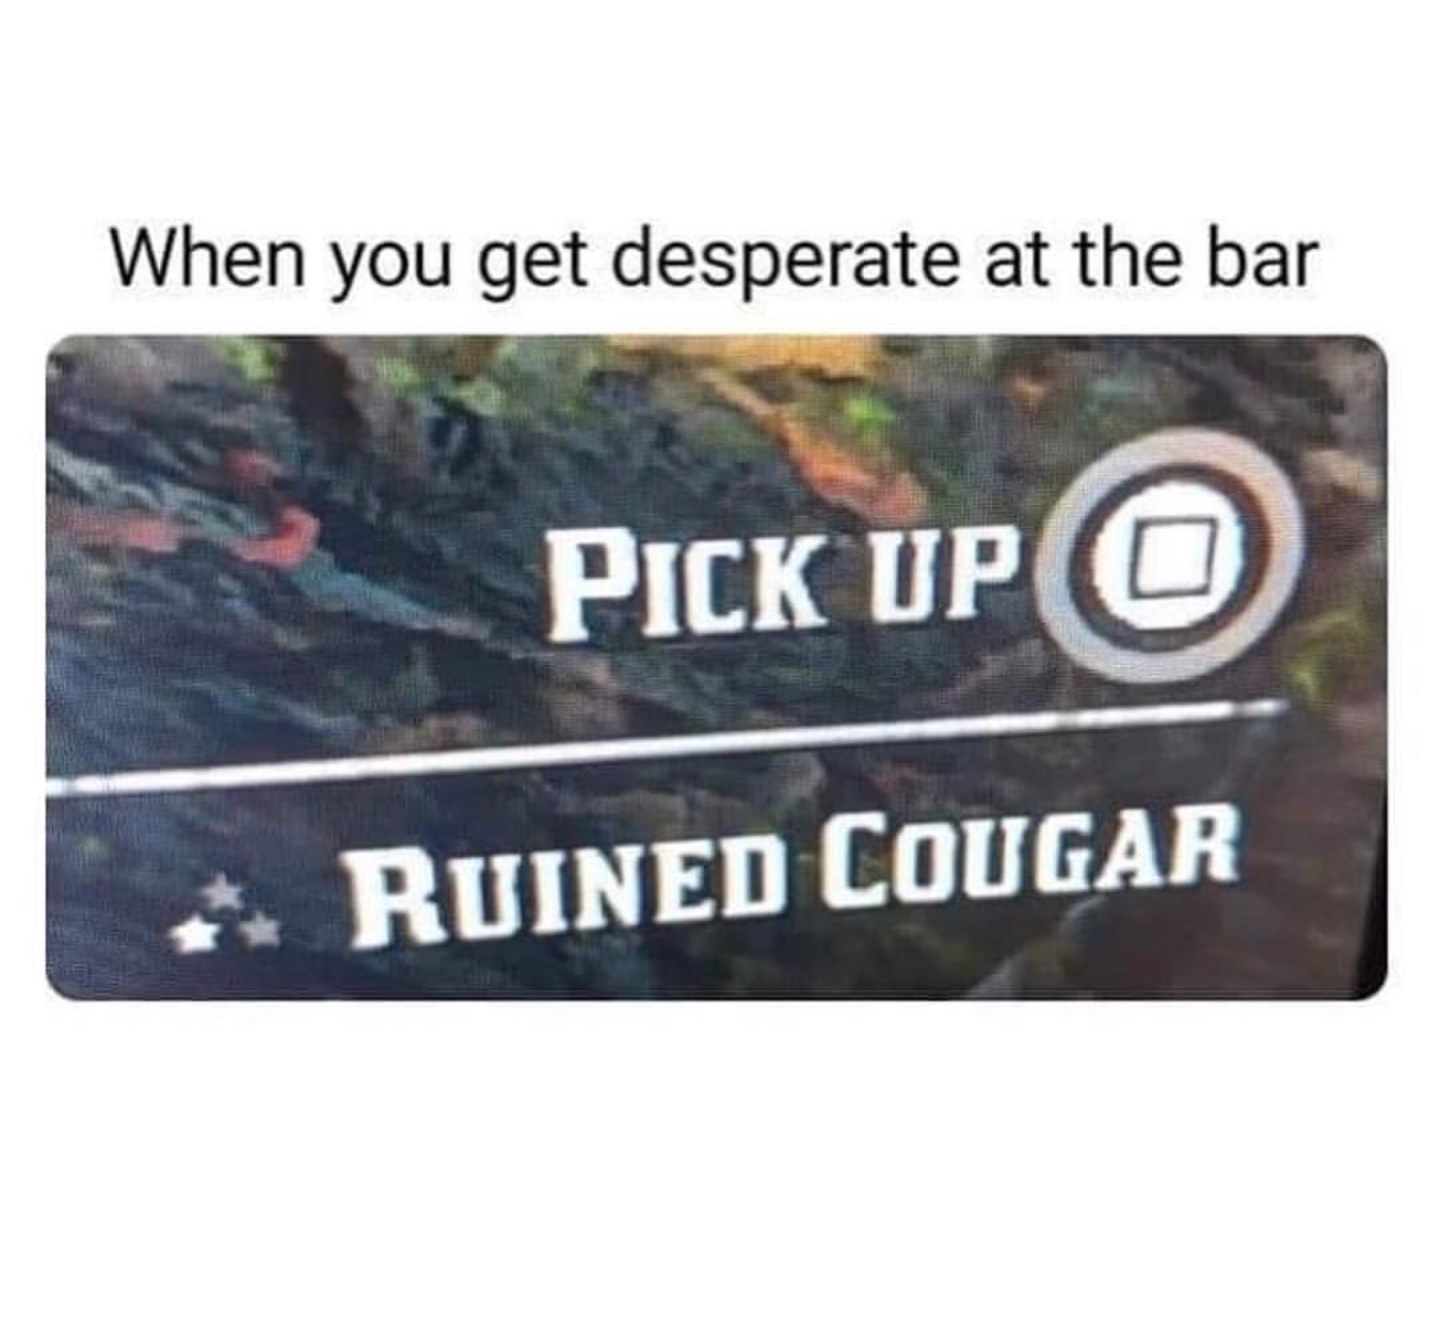 memes - rdr2 cougar meme - When you get desperate at the bar Pick Up O Ruined Cougar